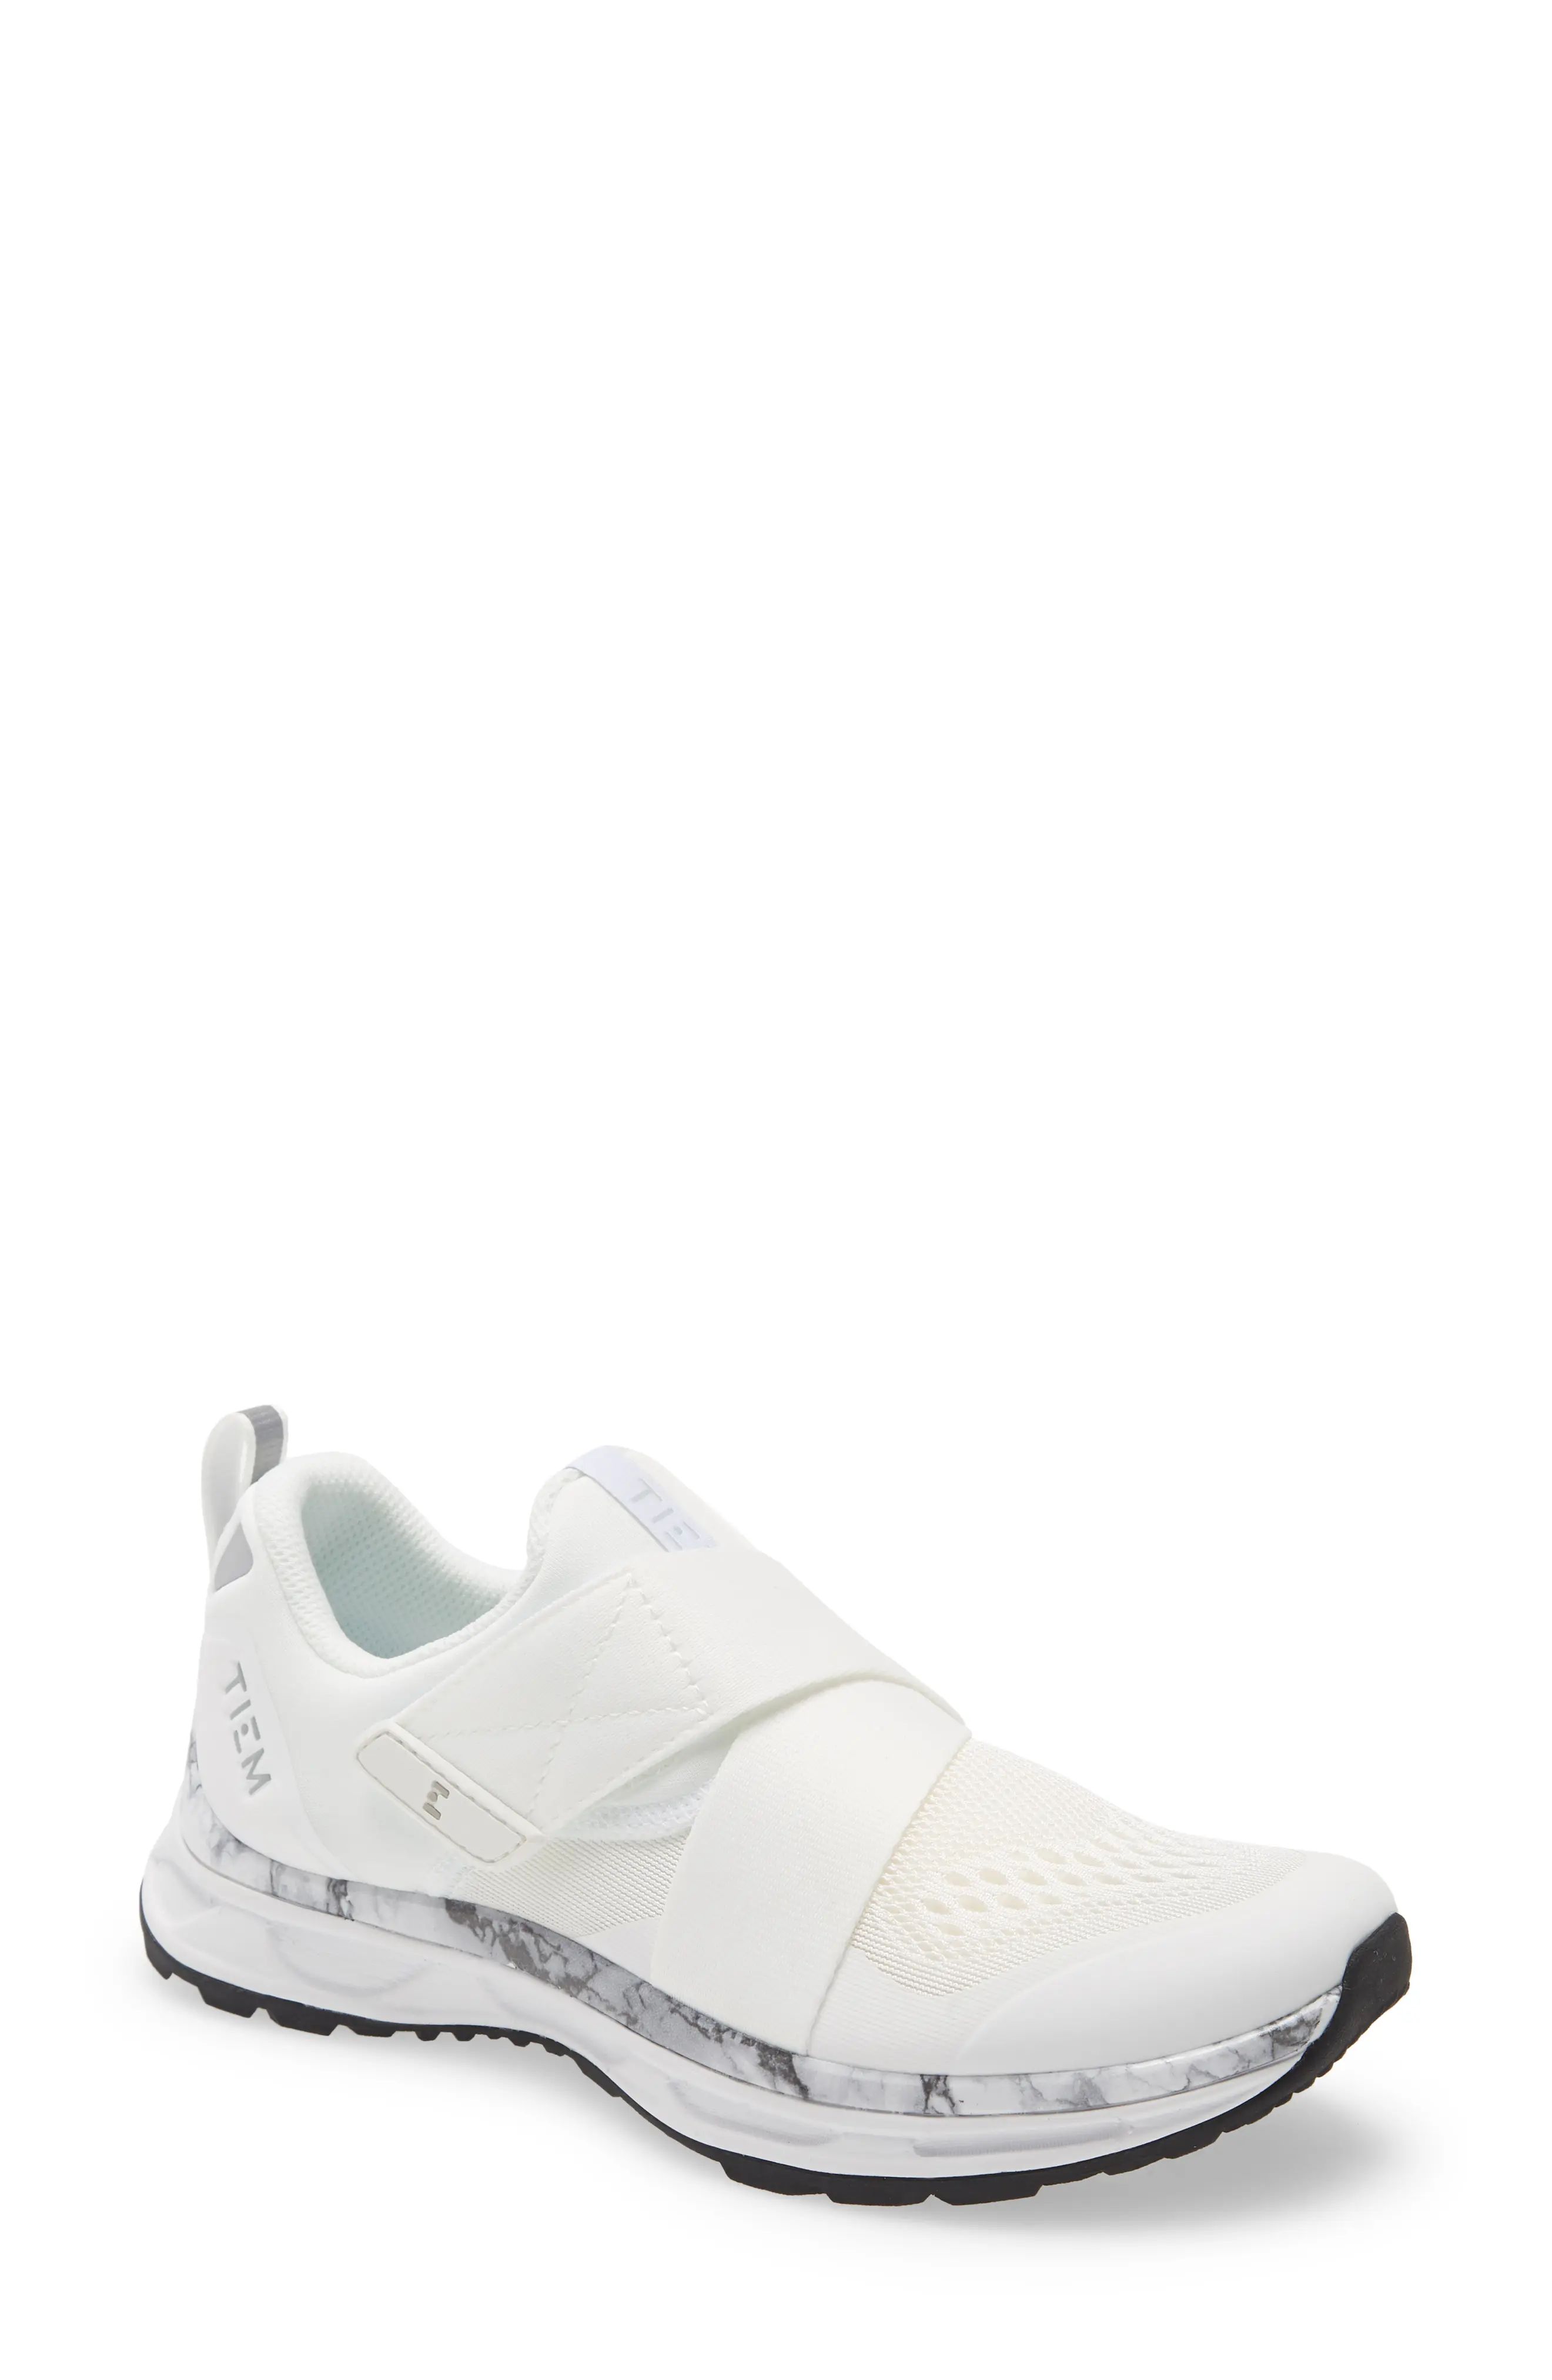 TIEM Slipstream Cycling Sneaker in White Marble at Nordstrom, Size 8 | Nordstrom